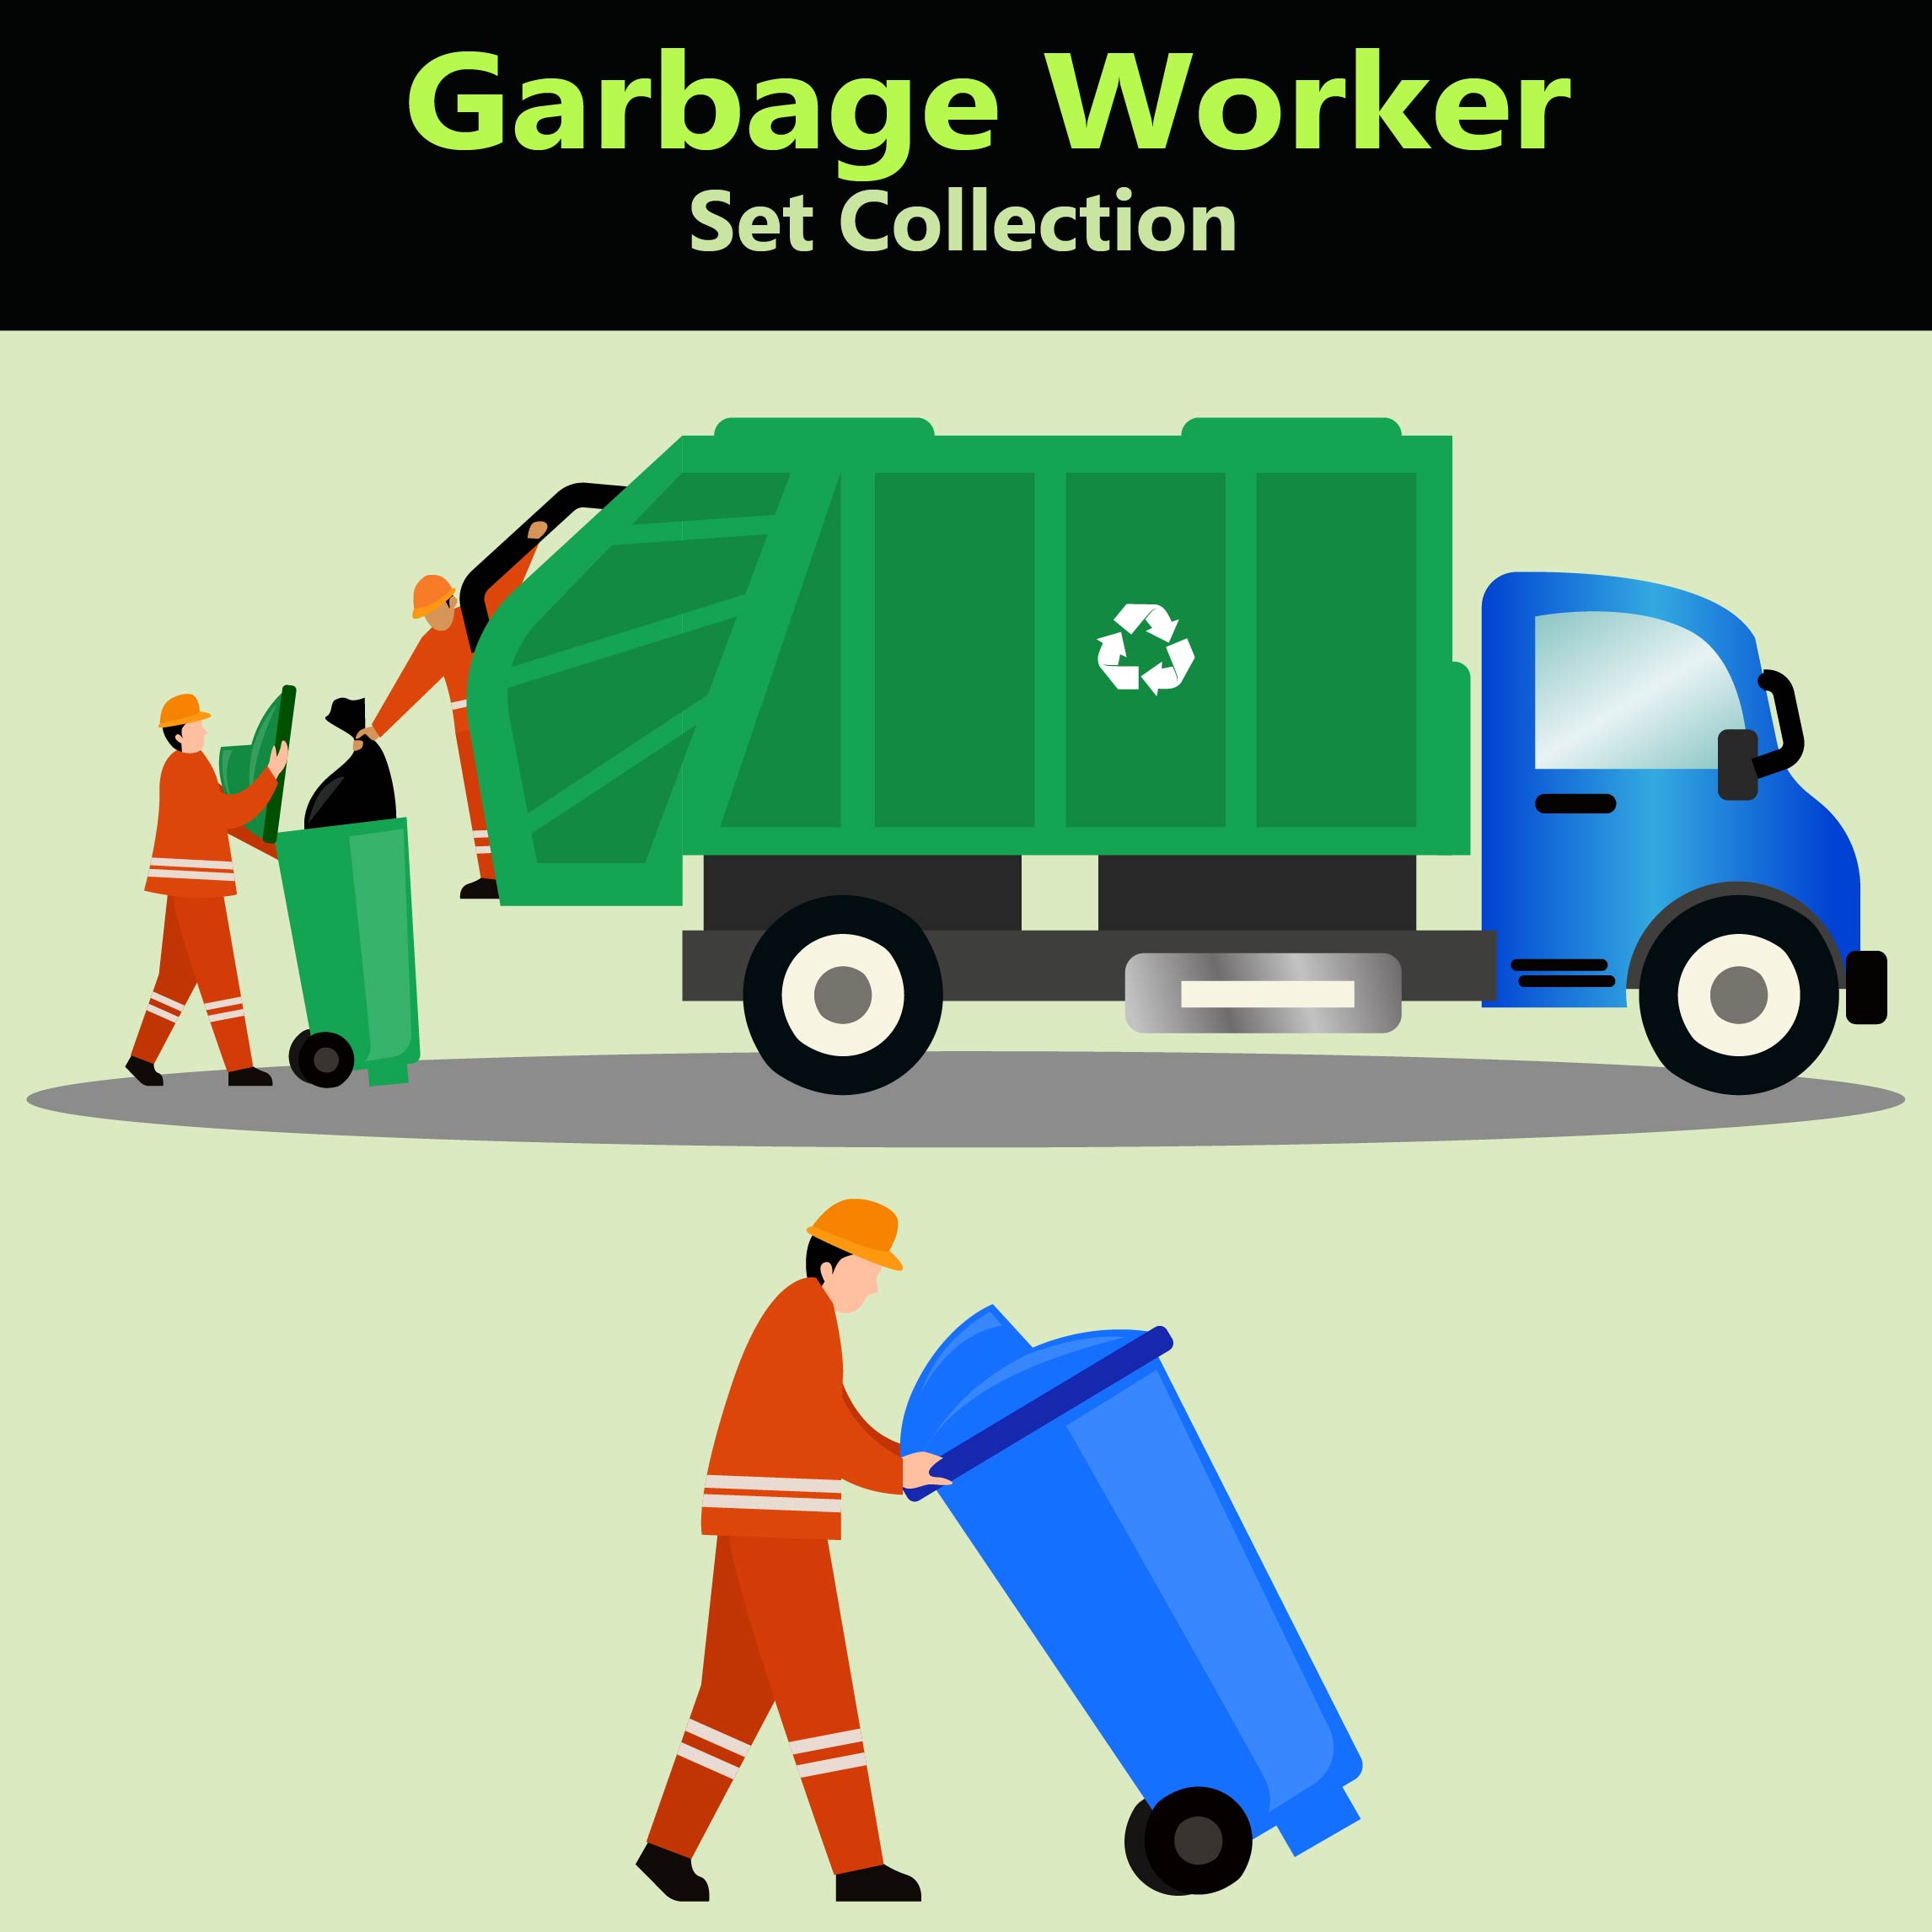 Waste Management and Garbage Worker Set Collection preview image.